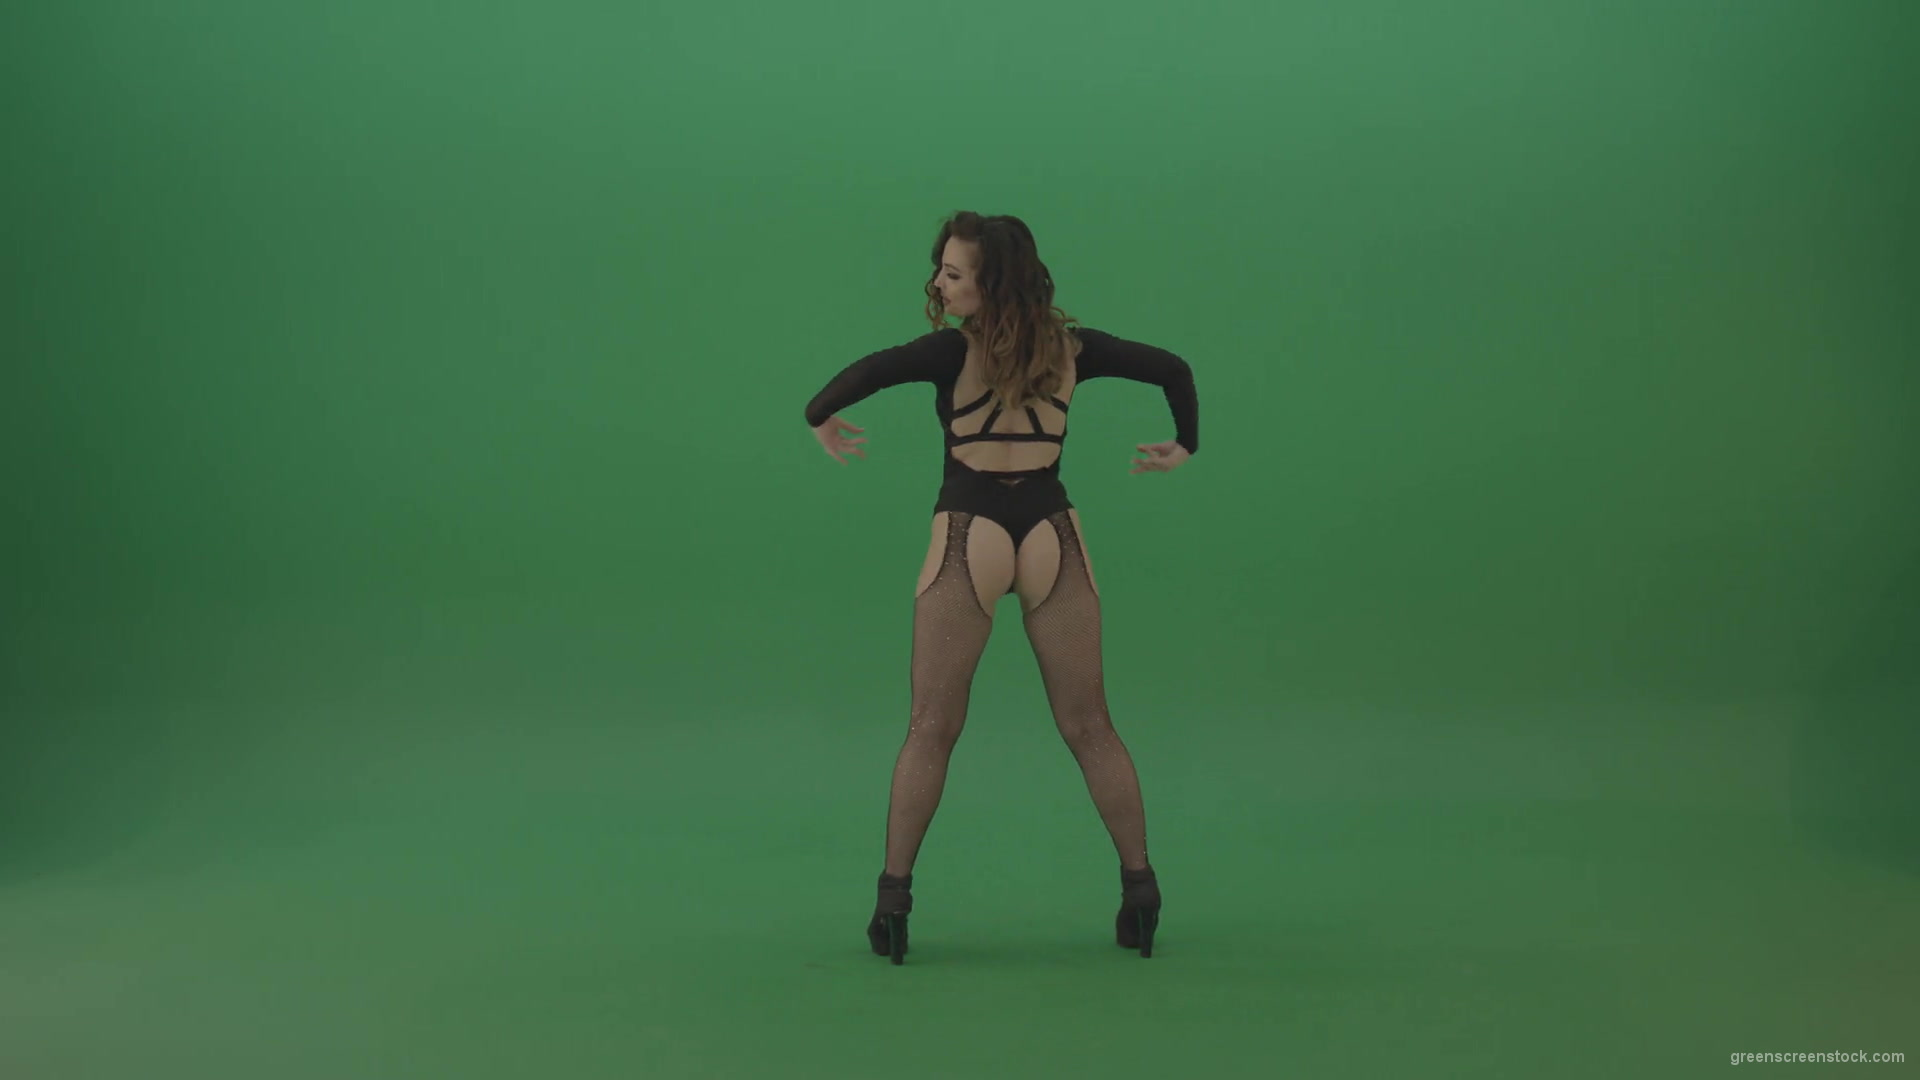 Beauty-girl-funny-shaking-the-ass-and-dancing-isolated-on-green-screen-1920_005 Green Screen Stock